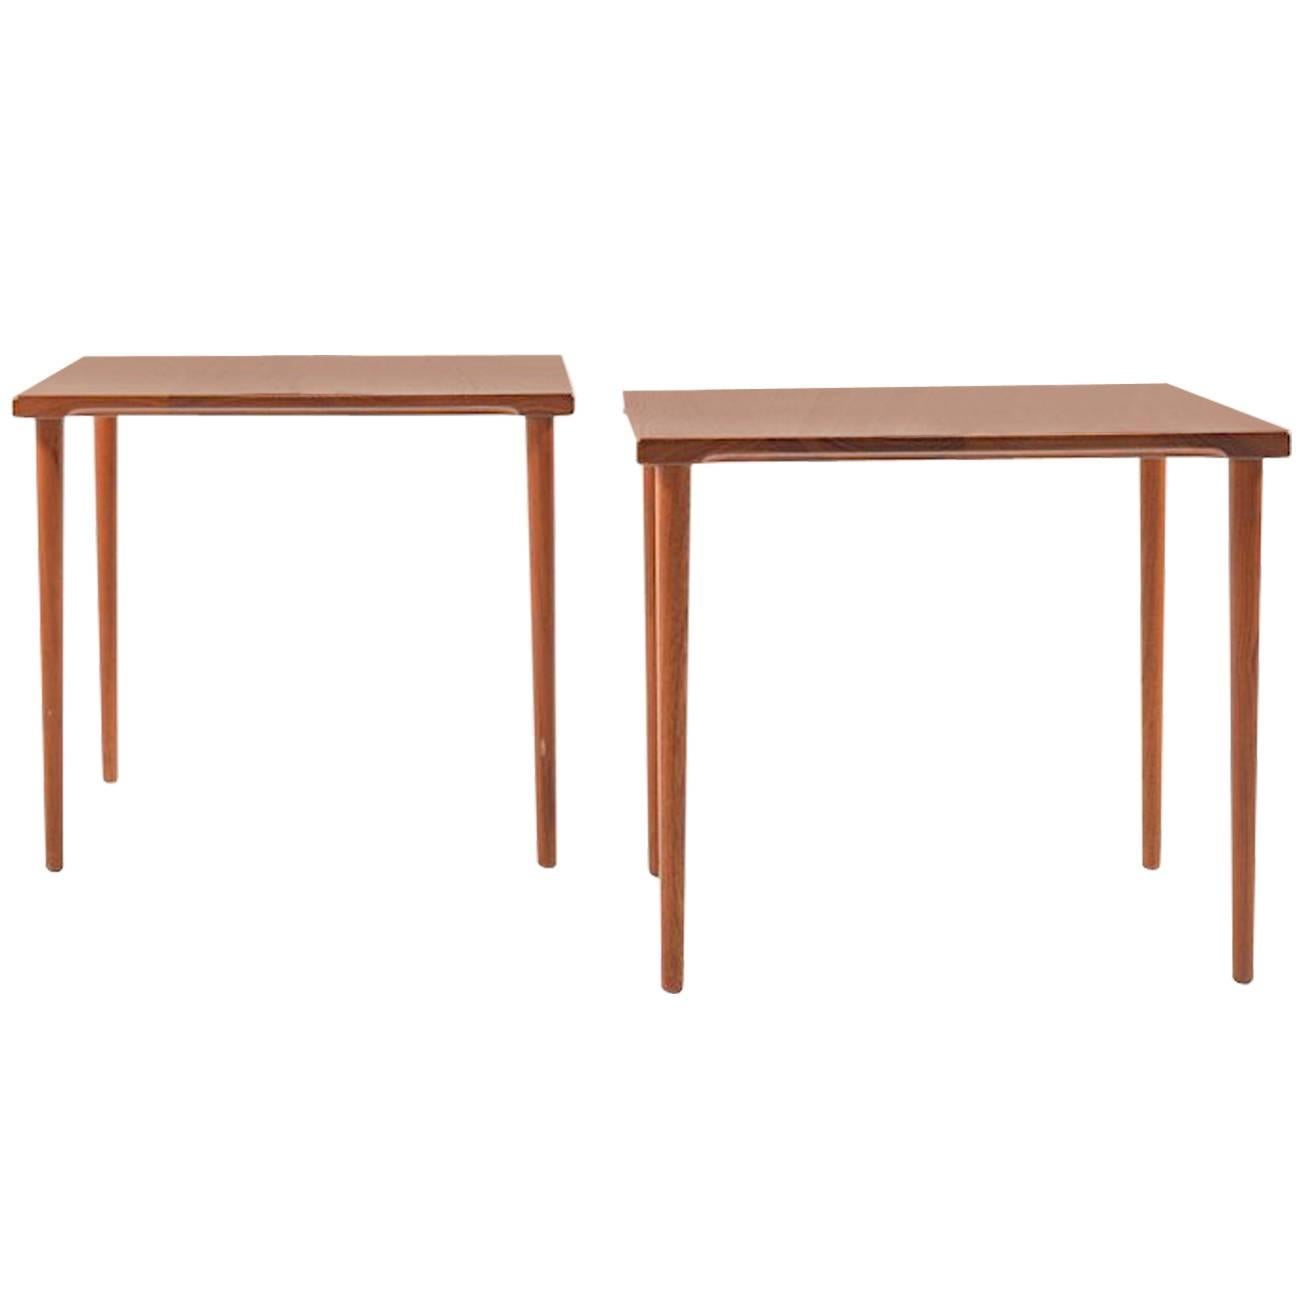 Pair of Mid-Century Danish Teak Side Tables by France & Son